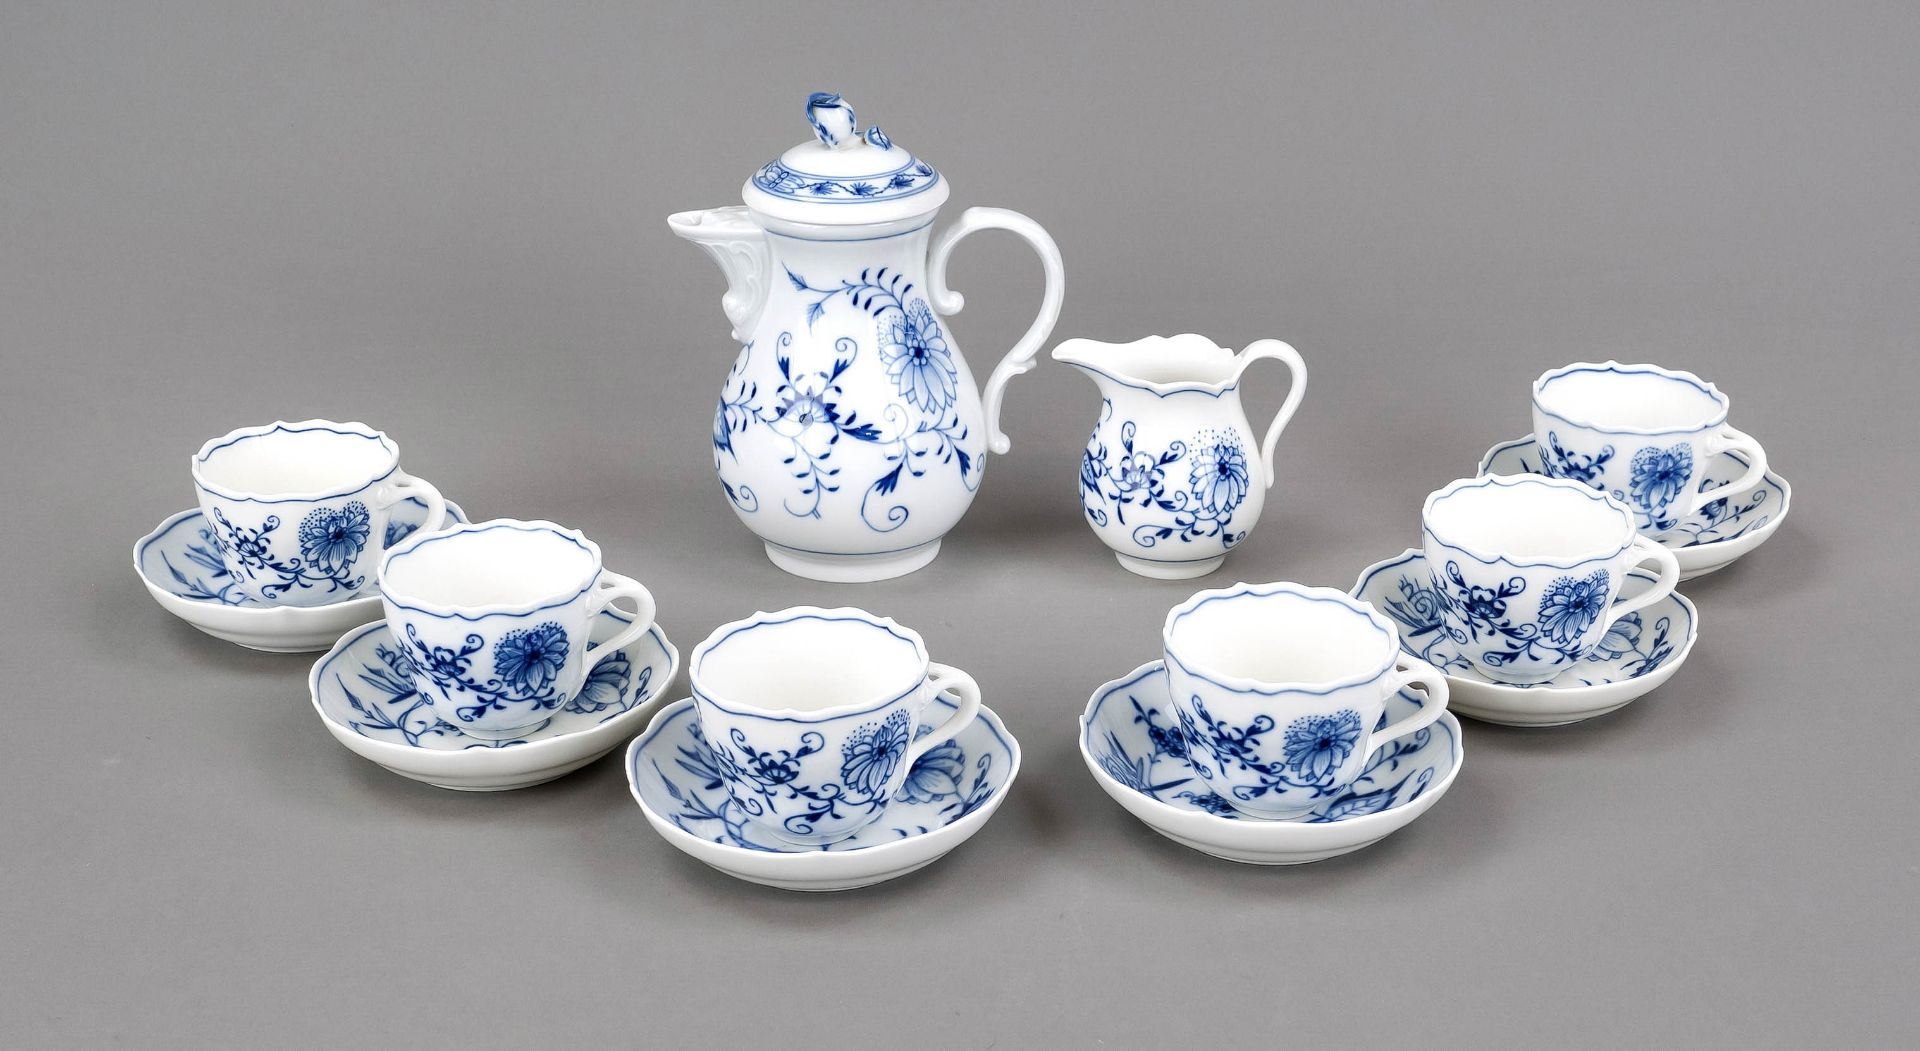 Mocha part service for 6 persons, 14-piece, Meissen, marks after 1934, 2nd and 3rd choice, shape New